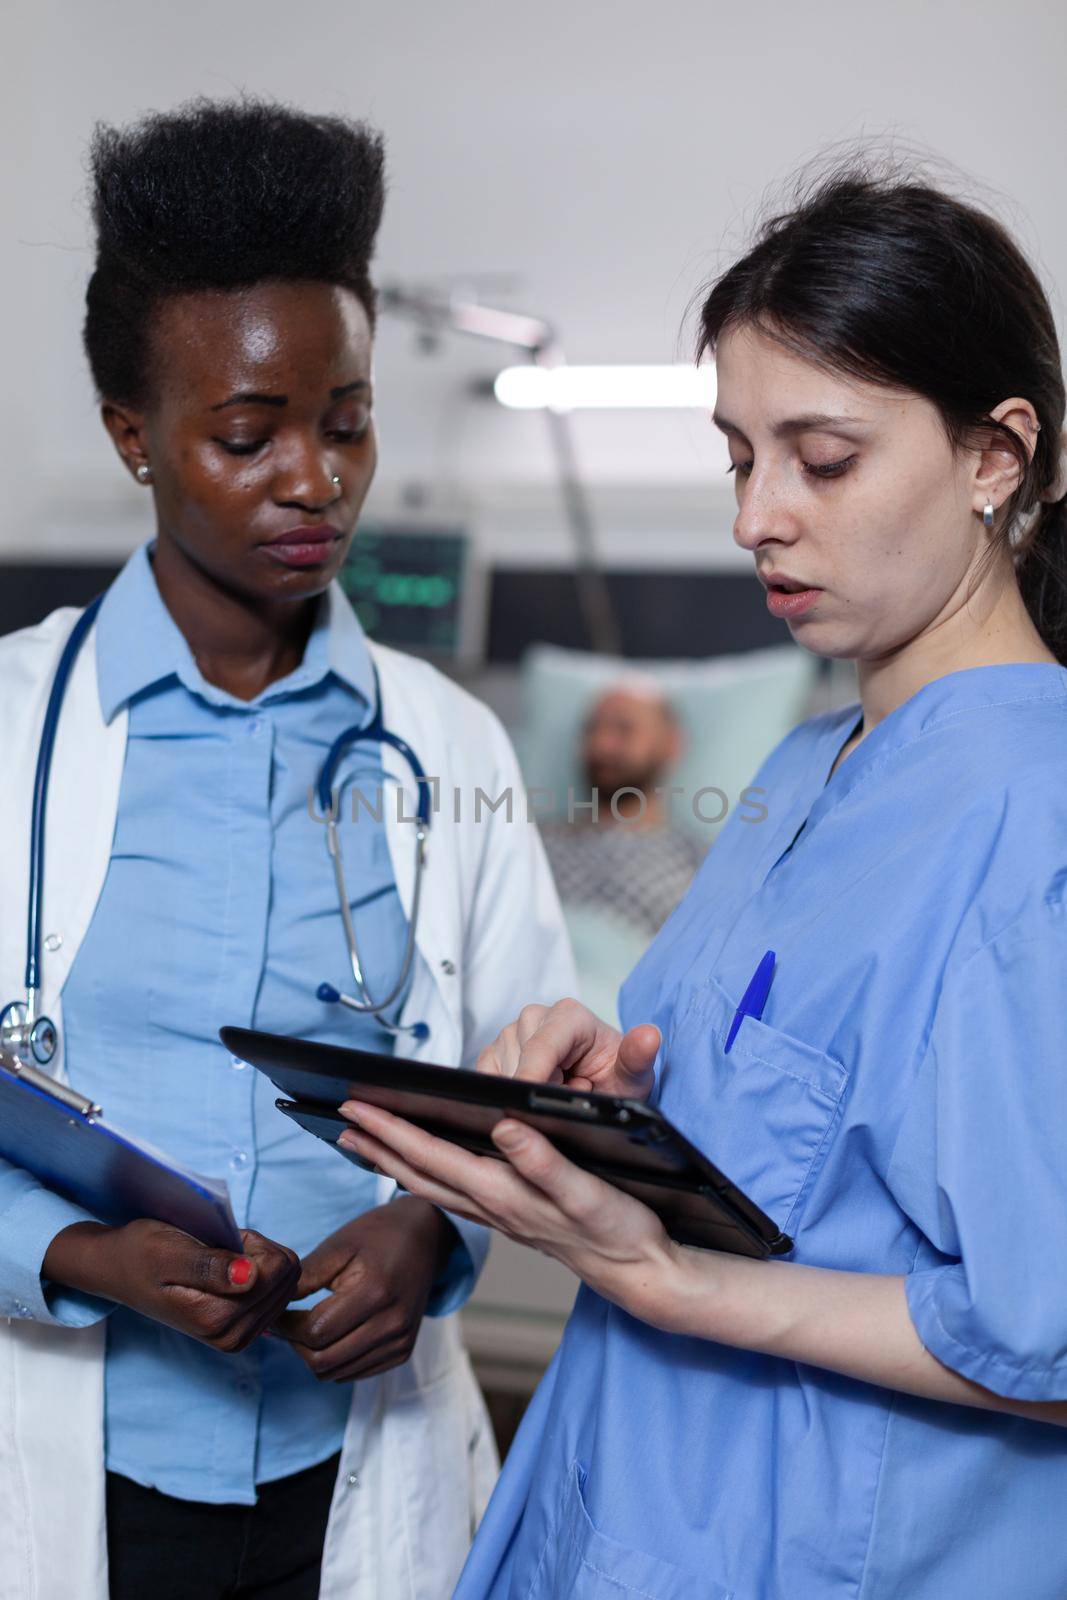 Nurse showing lab results from digital tablet to doctor holding clipboard with medical history in modern hospital ward. Health care specialists using modern technology for clinical diagnosis.